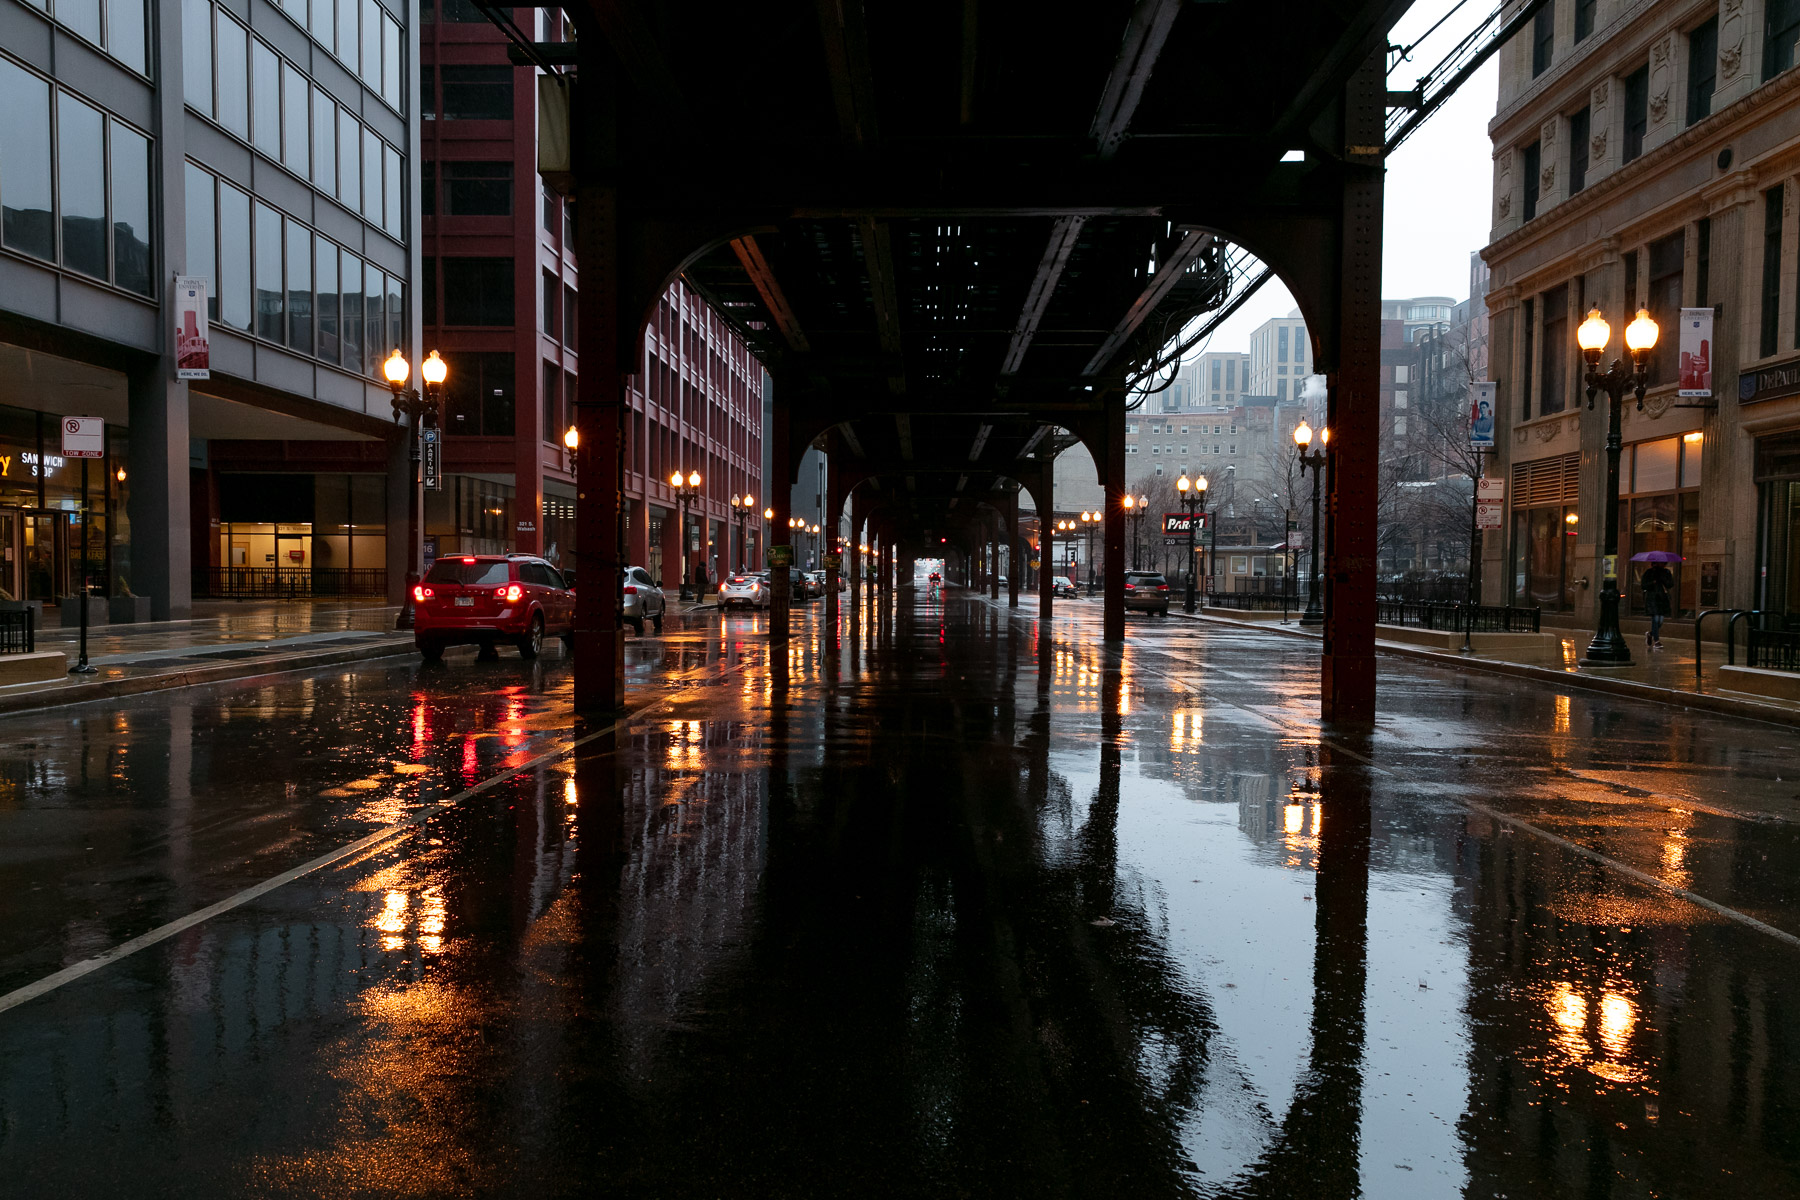 Wabash Avenue, usually busy during the height of evening rush hour, remains quiet as many citizens stay home during the COVID-19 pandemic. (DePaul University/Randall Spriggs)